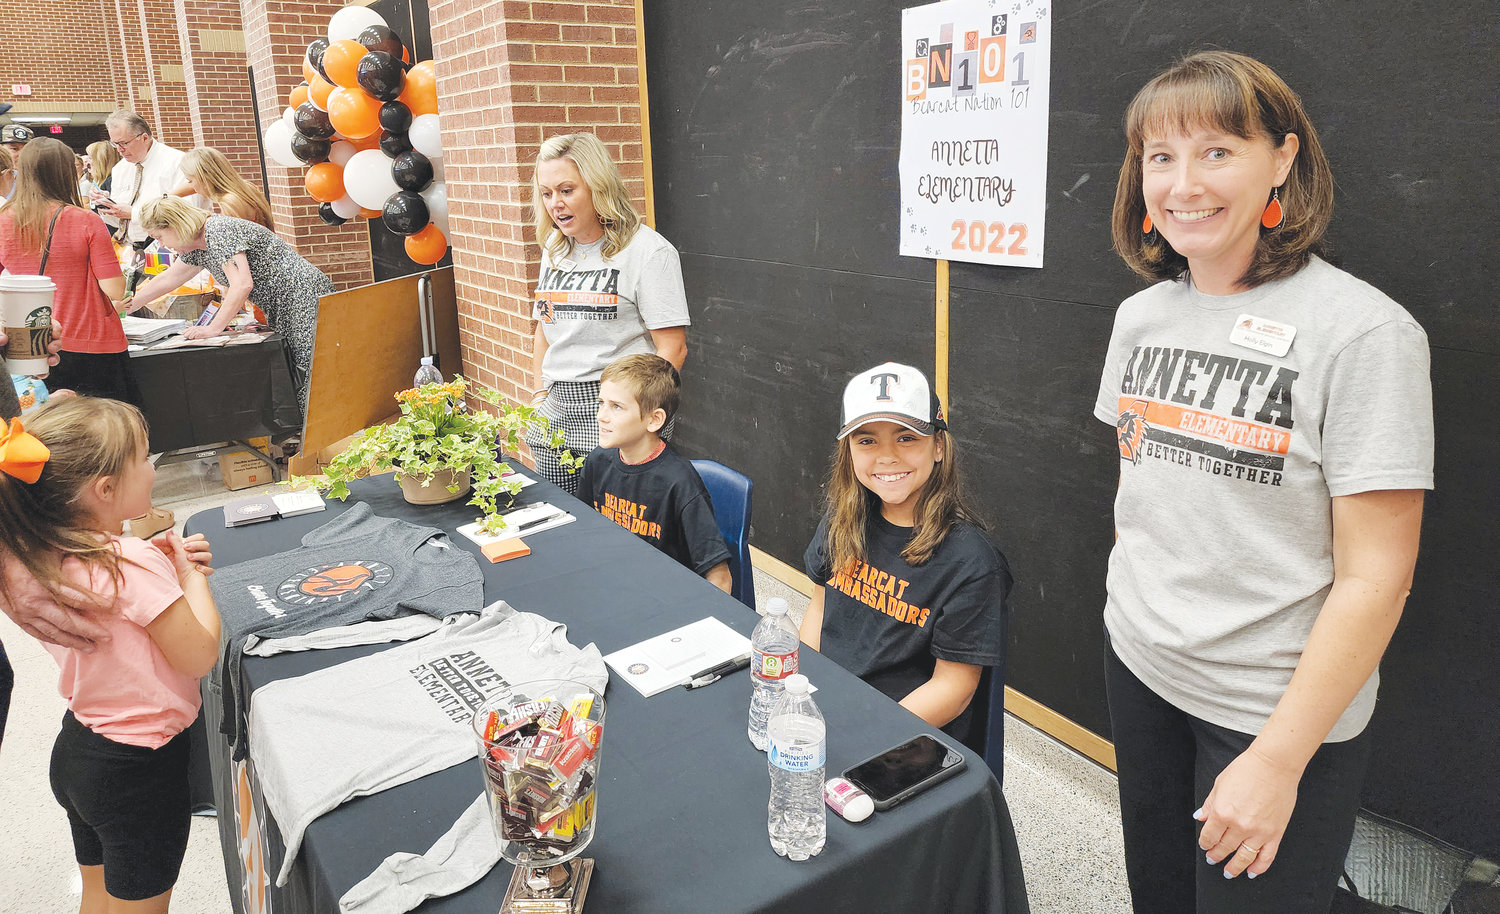 Annetta Elementary School (standing, from left) Principals Alyssa Seay and Holly Elgin, (sitting) Lincoln Sloan and Estella Garcia